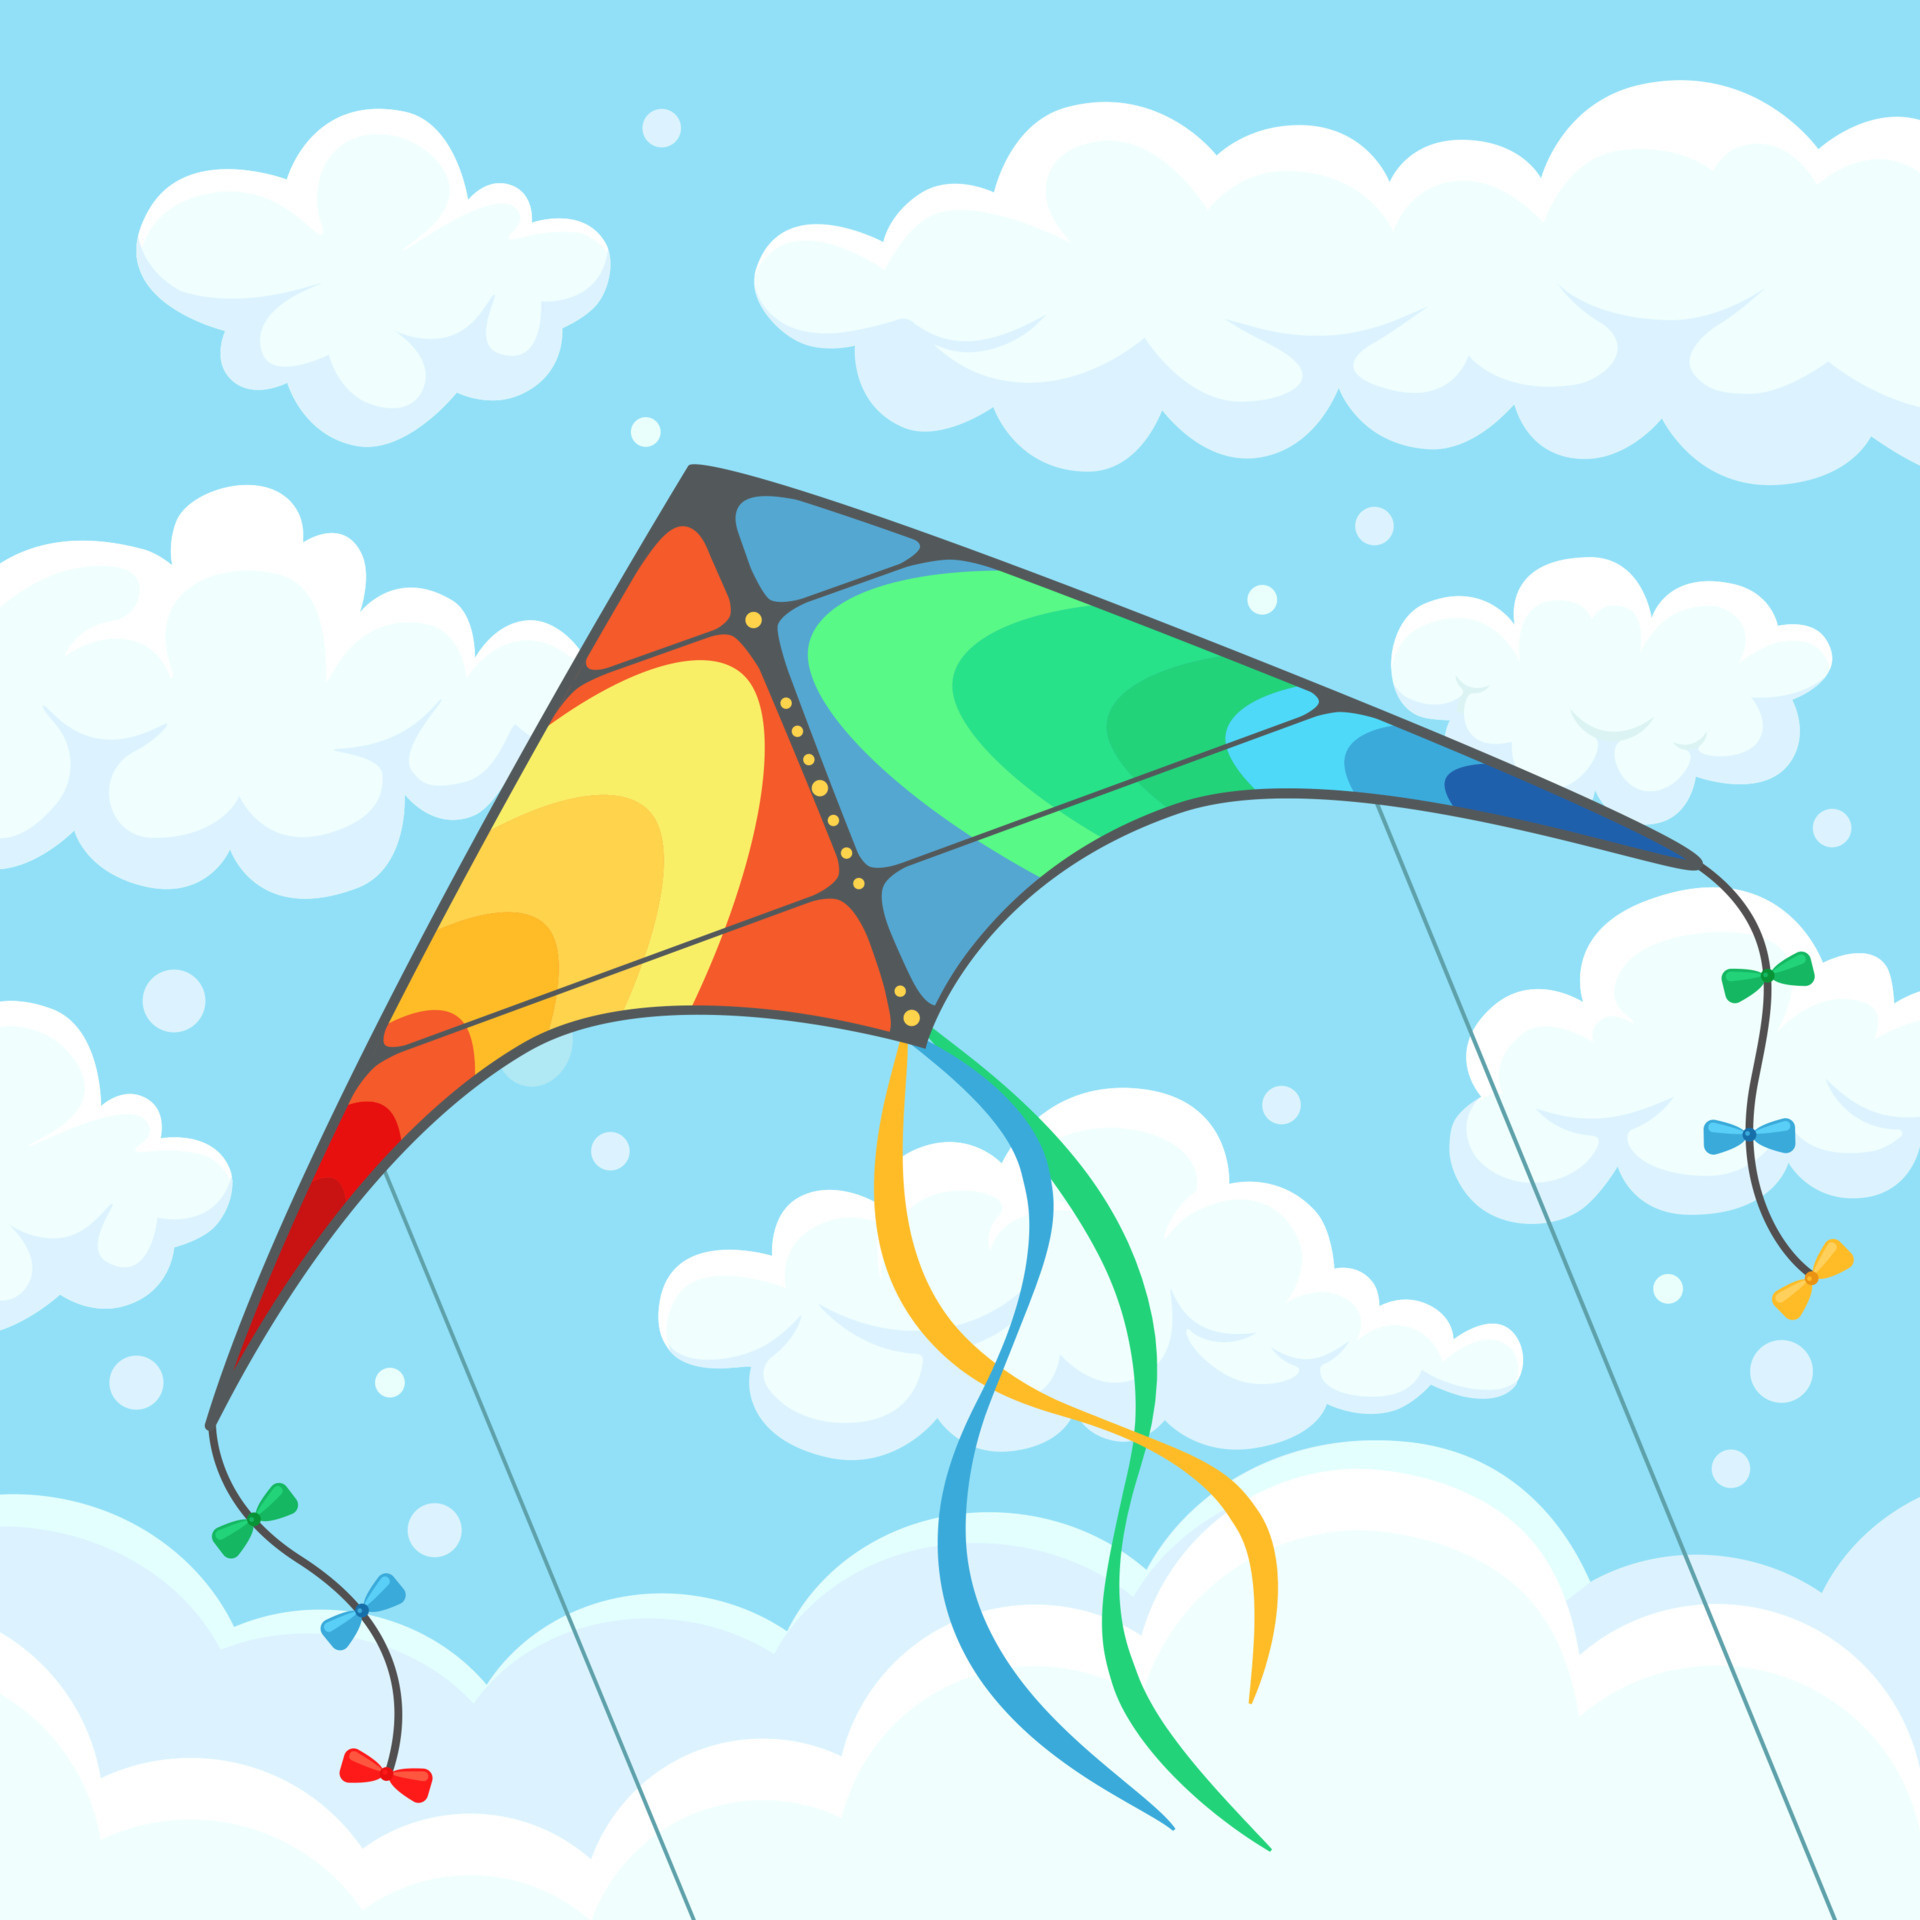 Kite Flying: Flying colorful kite in the sky with clouds, Kitesurfing, Drawing, Cartoon design, Vector illustration. 1920x1920 HD Wallpaper.